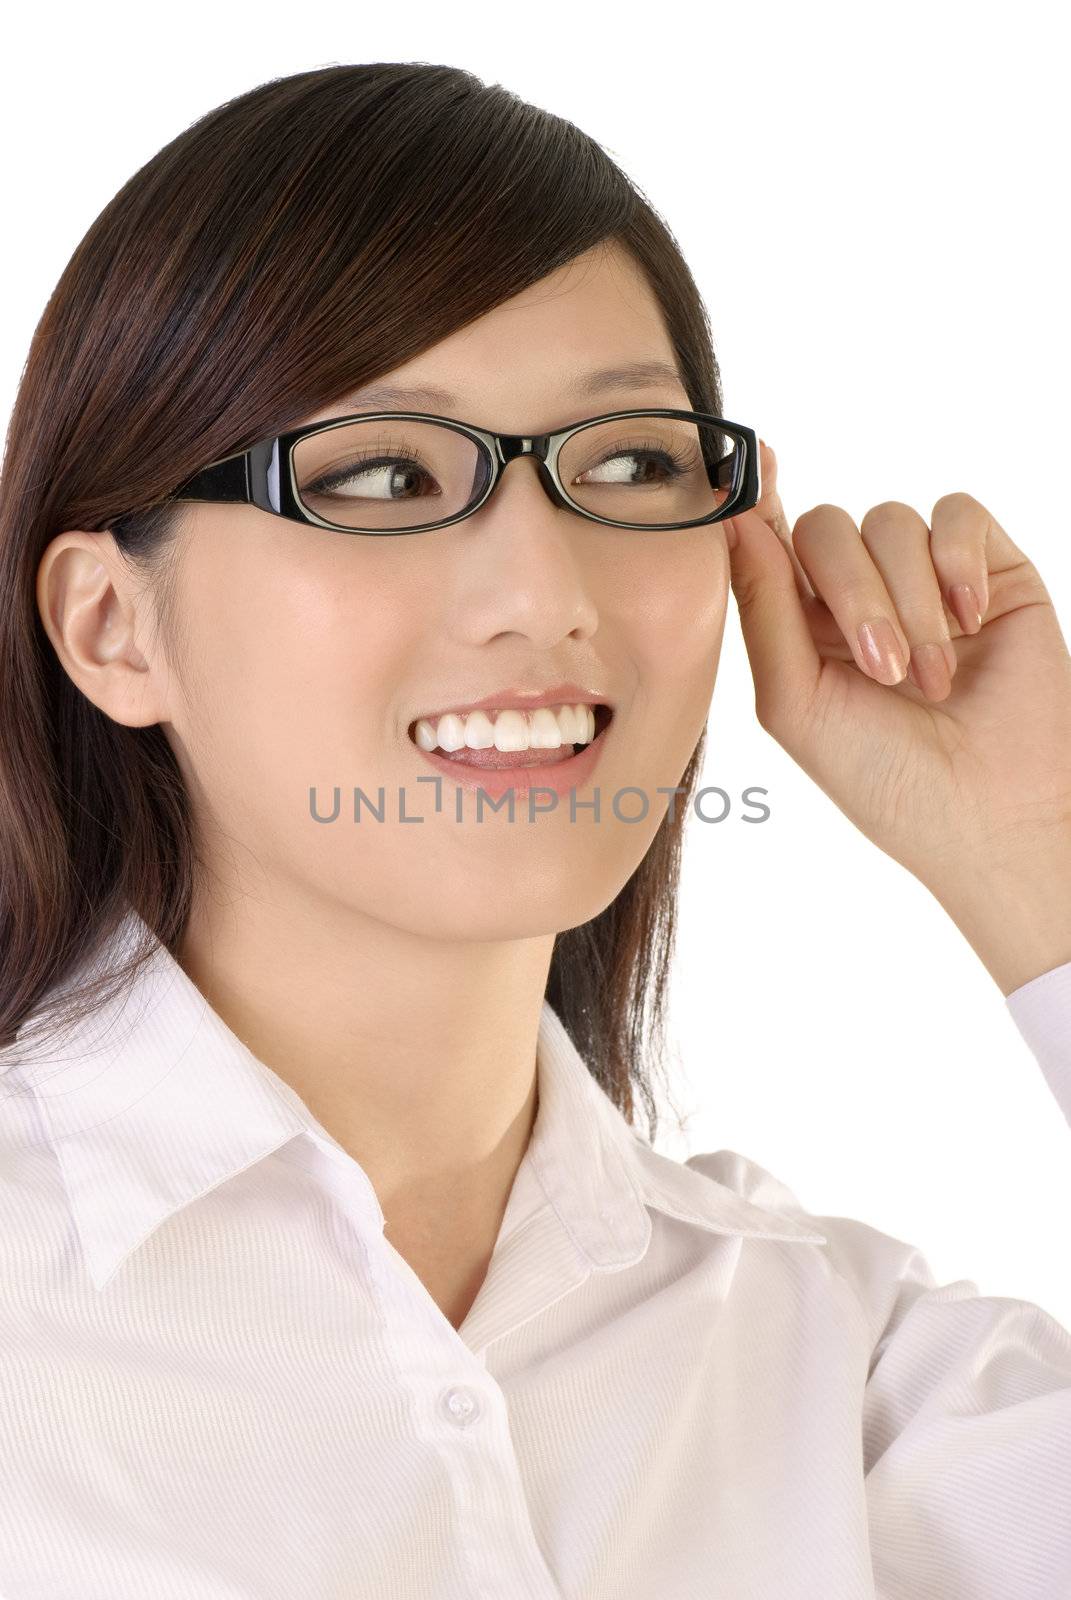 Successful business woman portrait of Asian with glass smiling.